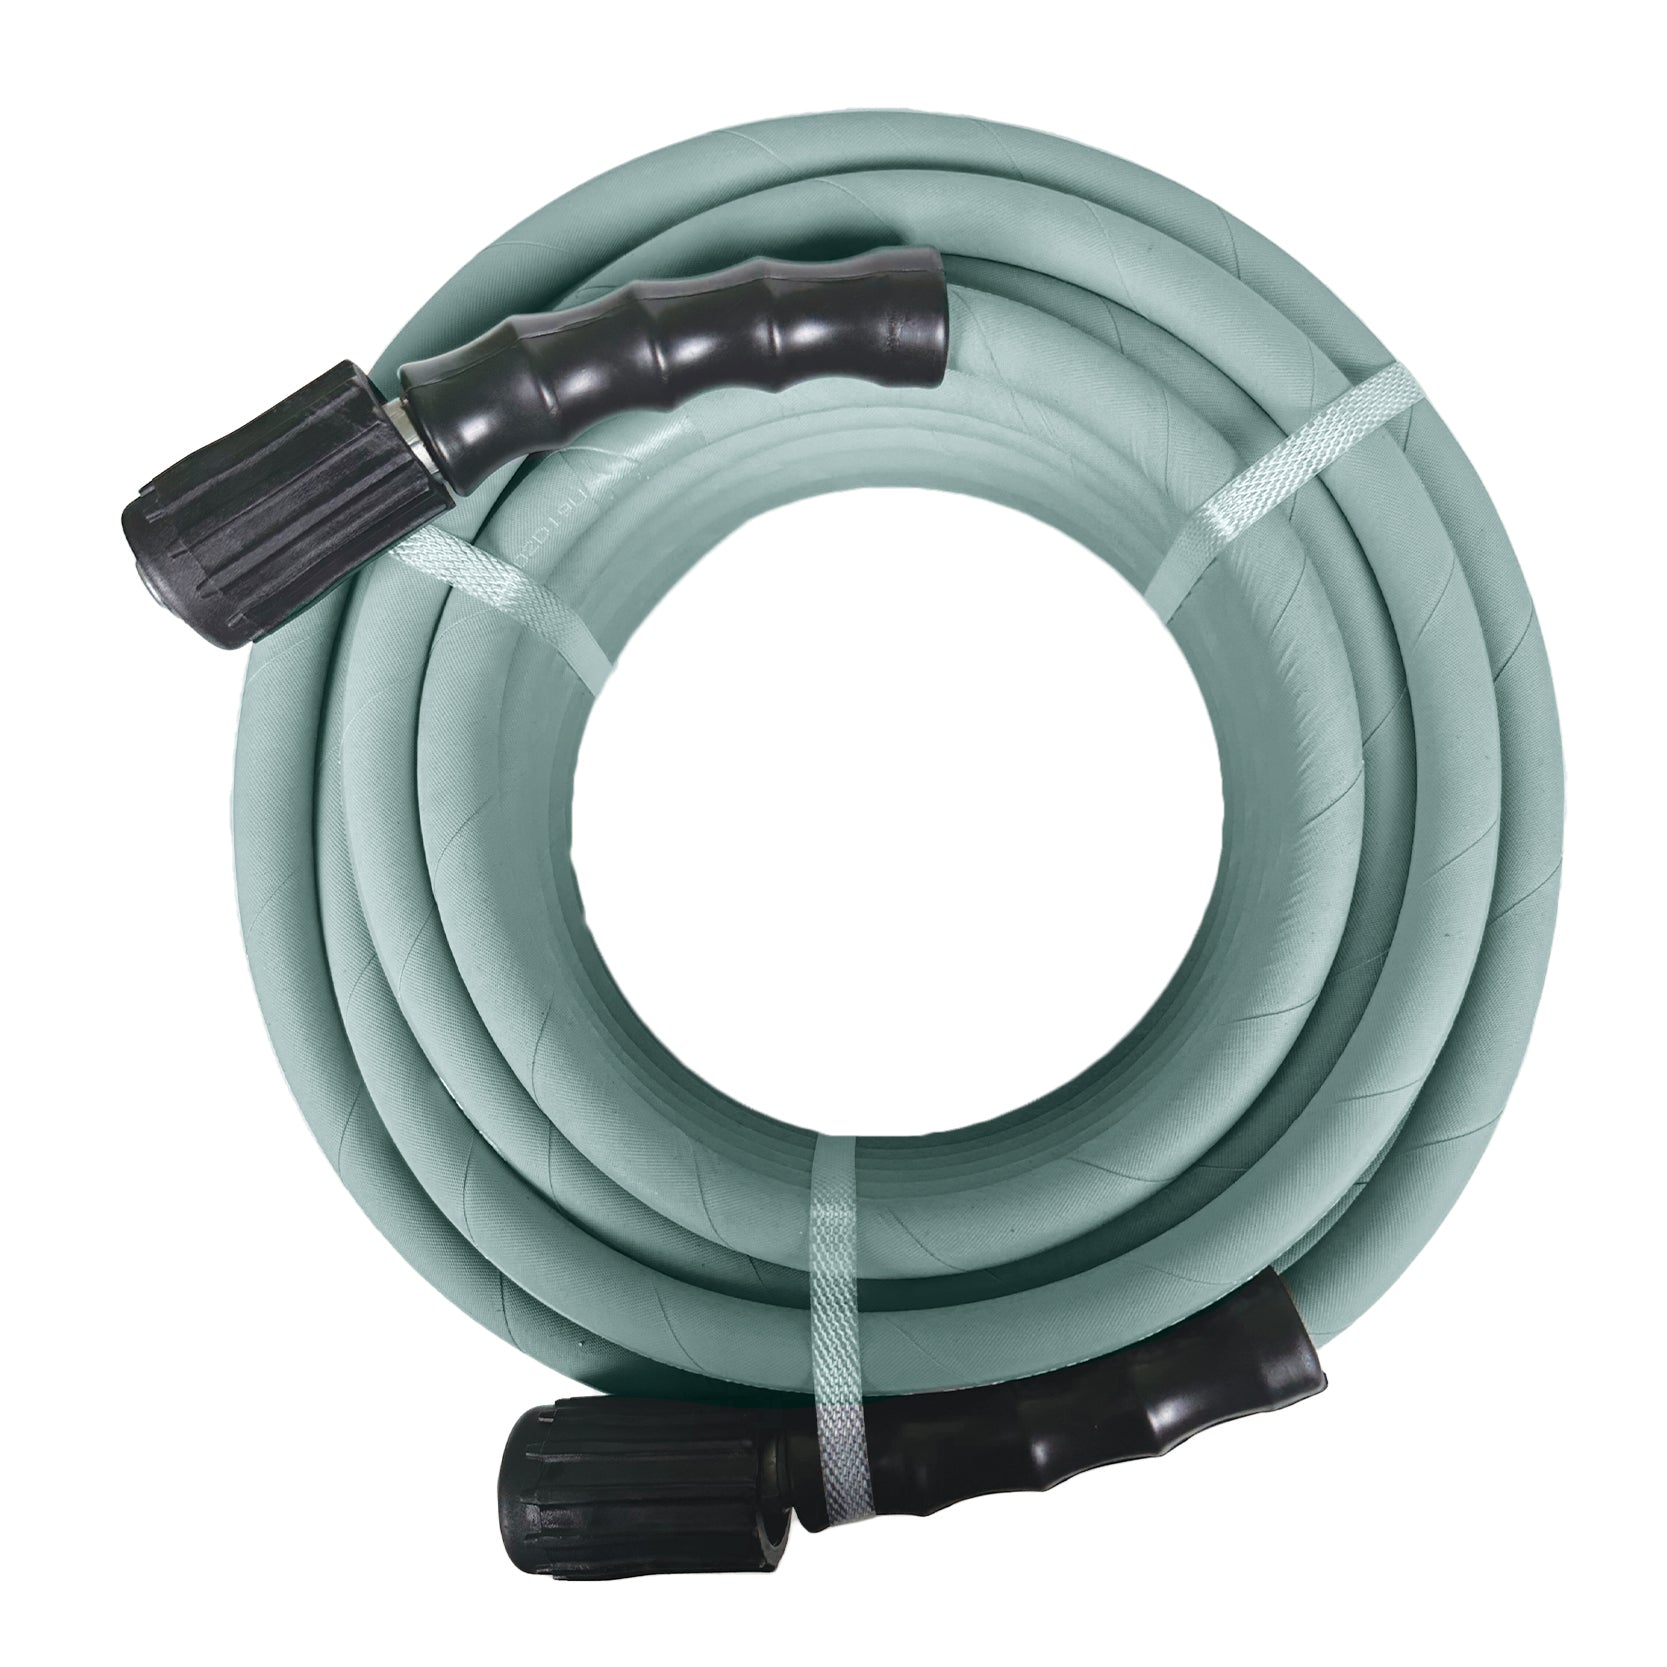 Blushield Pressure Washer Hose Non Marking 1/4" x 25' with M22